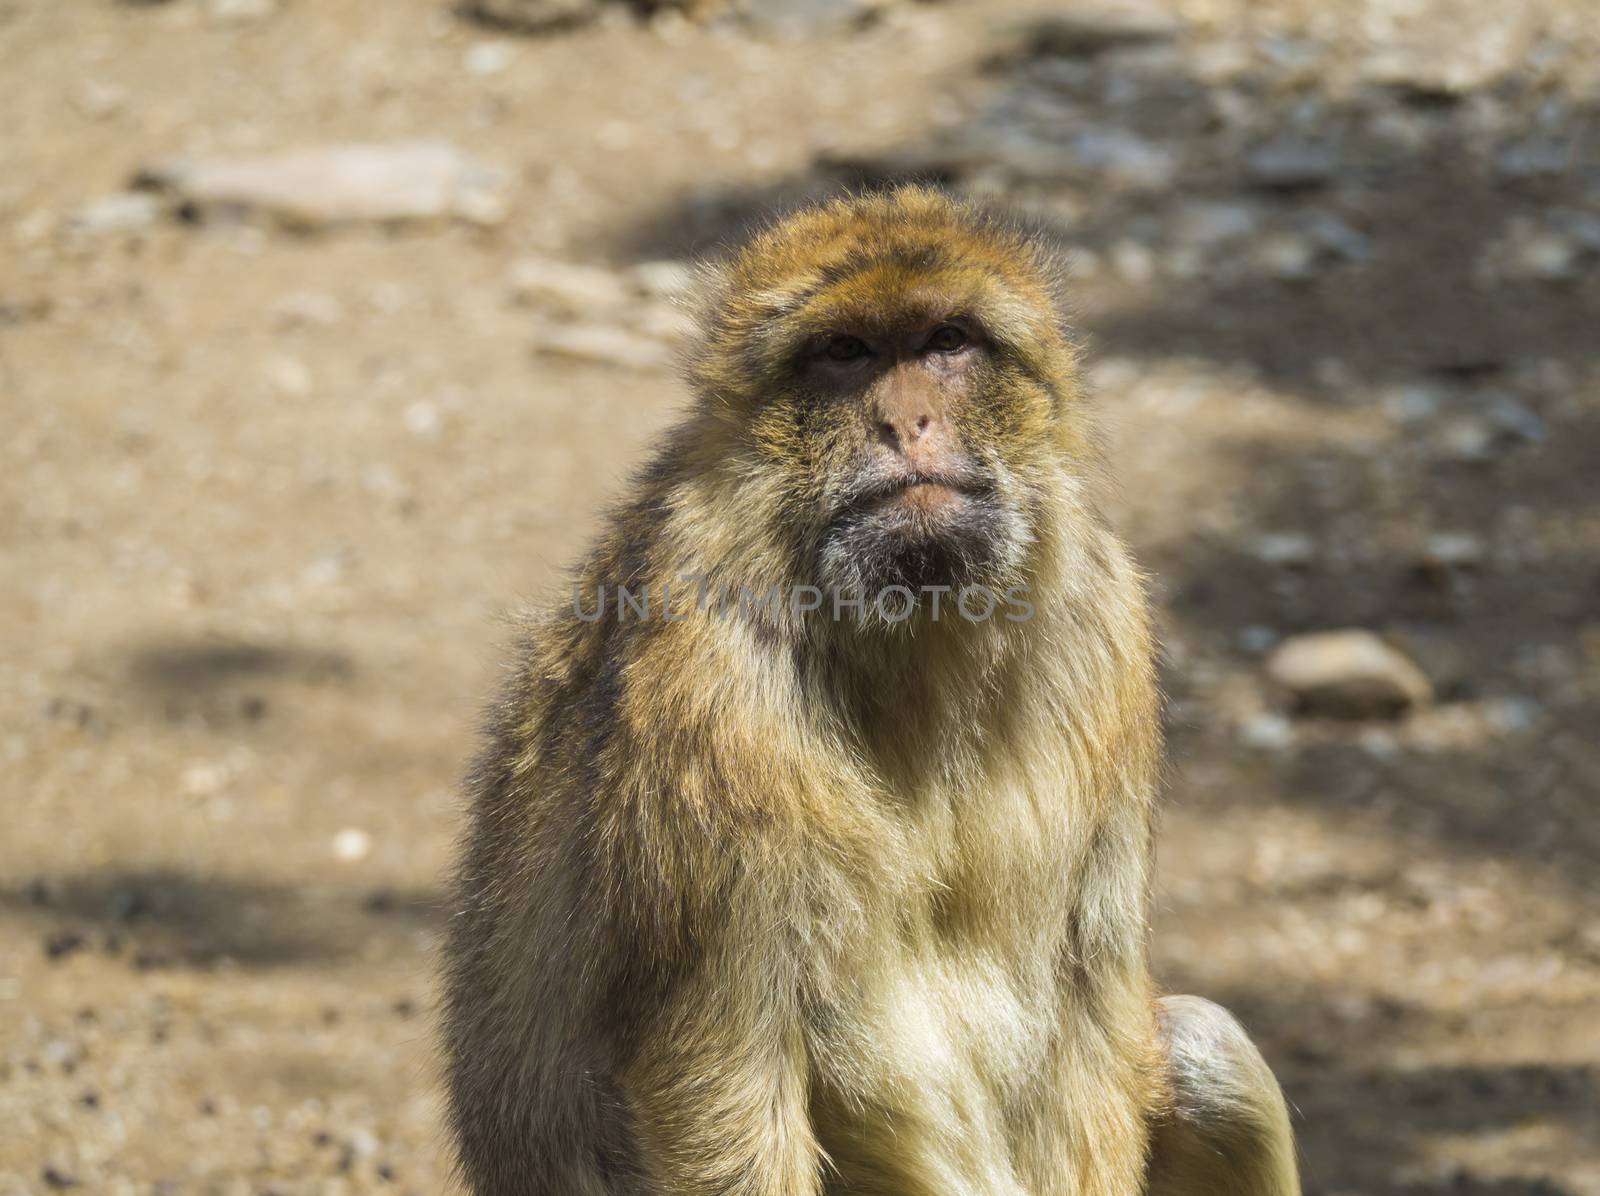 Close up portrait of Barbary macaque, Macaca sylvanus, looking to the camera, selective focus, copy space for text. by Henkeova